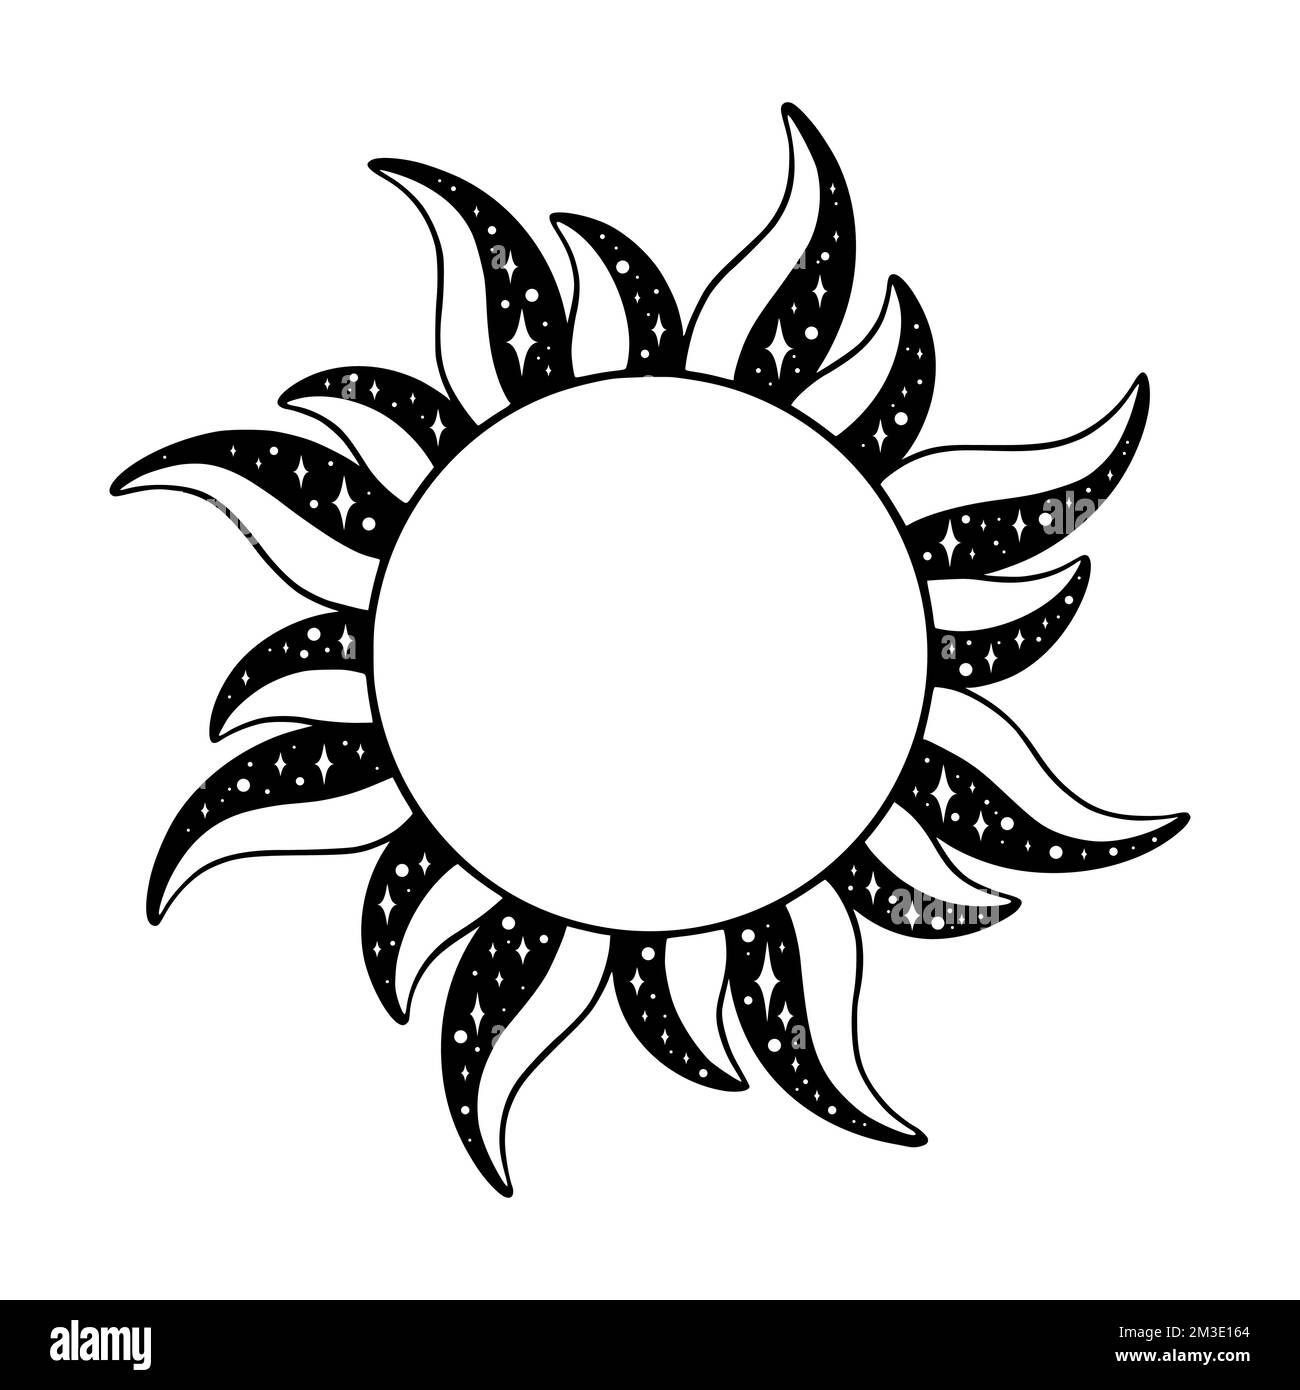 Tarot sun with stars. Spiritual tarot sun with curly rays. Vector illustration isolated in white background Stock Vector